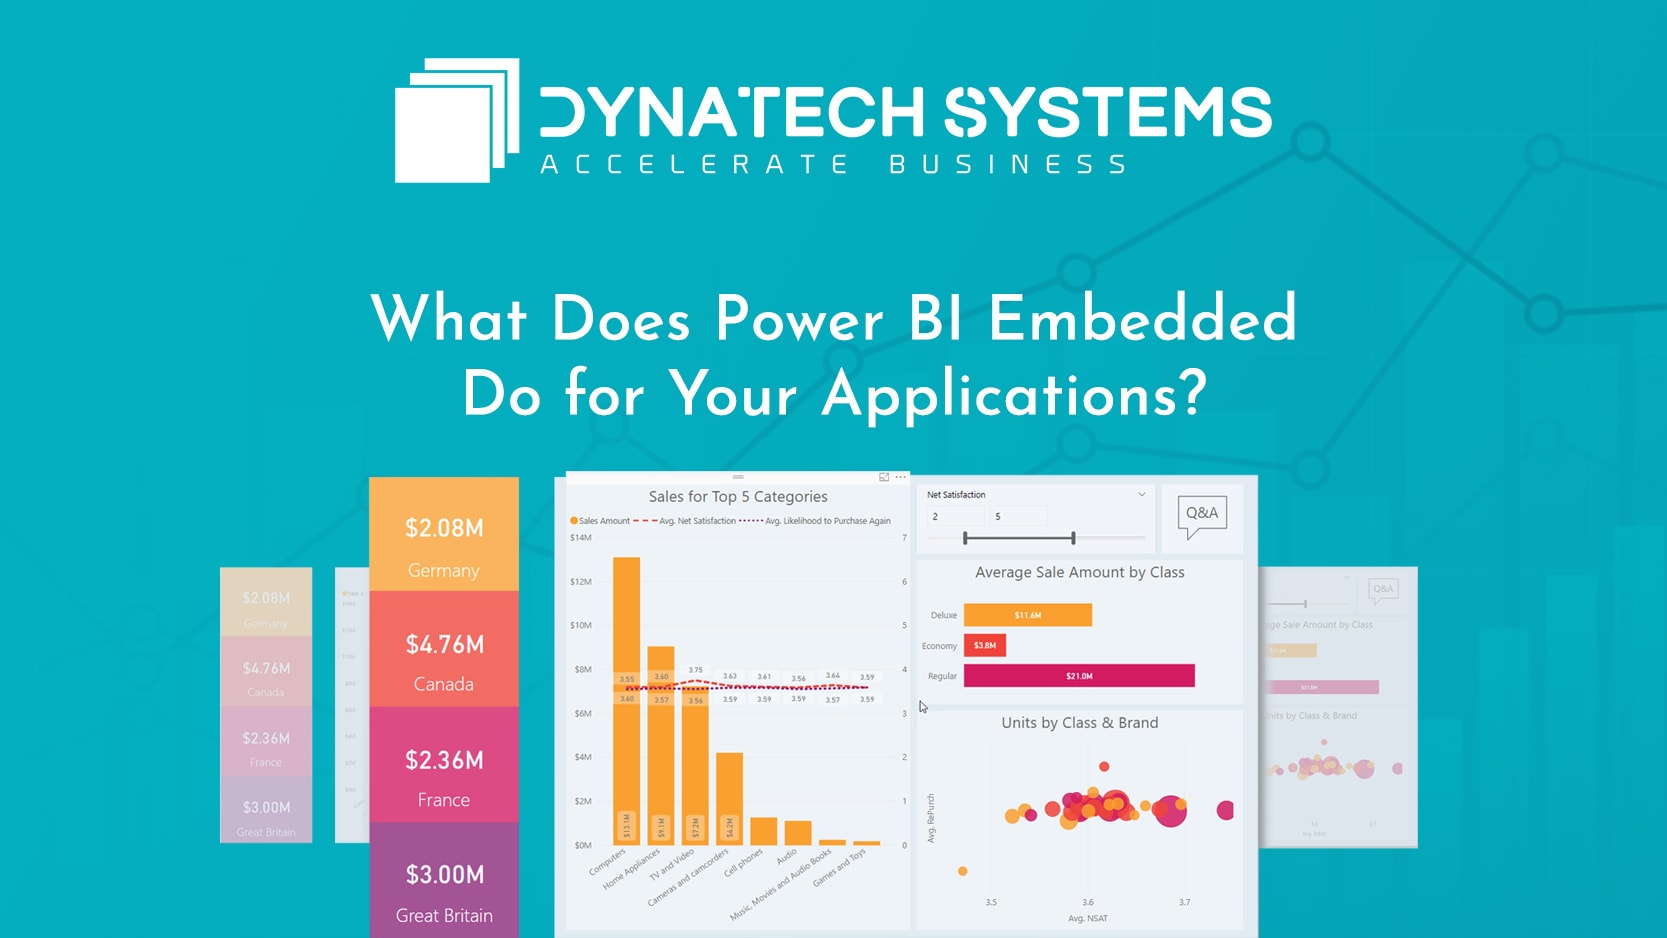 What Does Power BI Embedded Do for Your Applications?